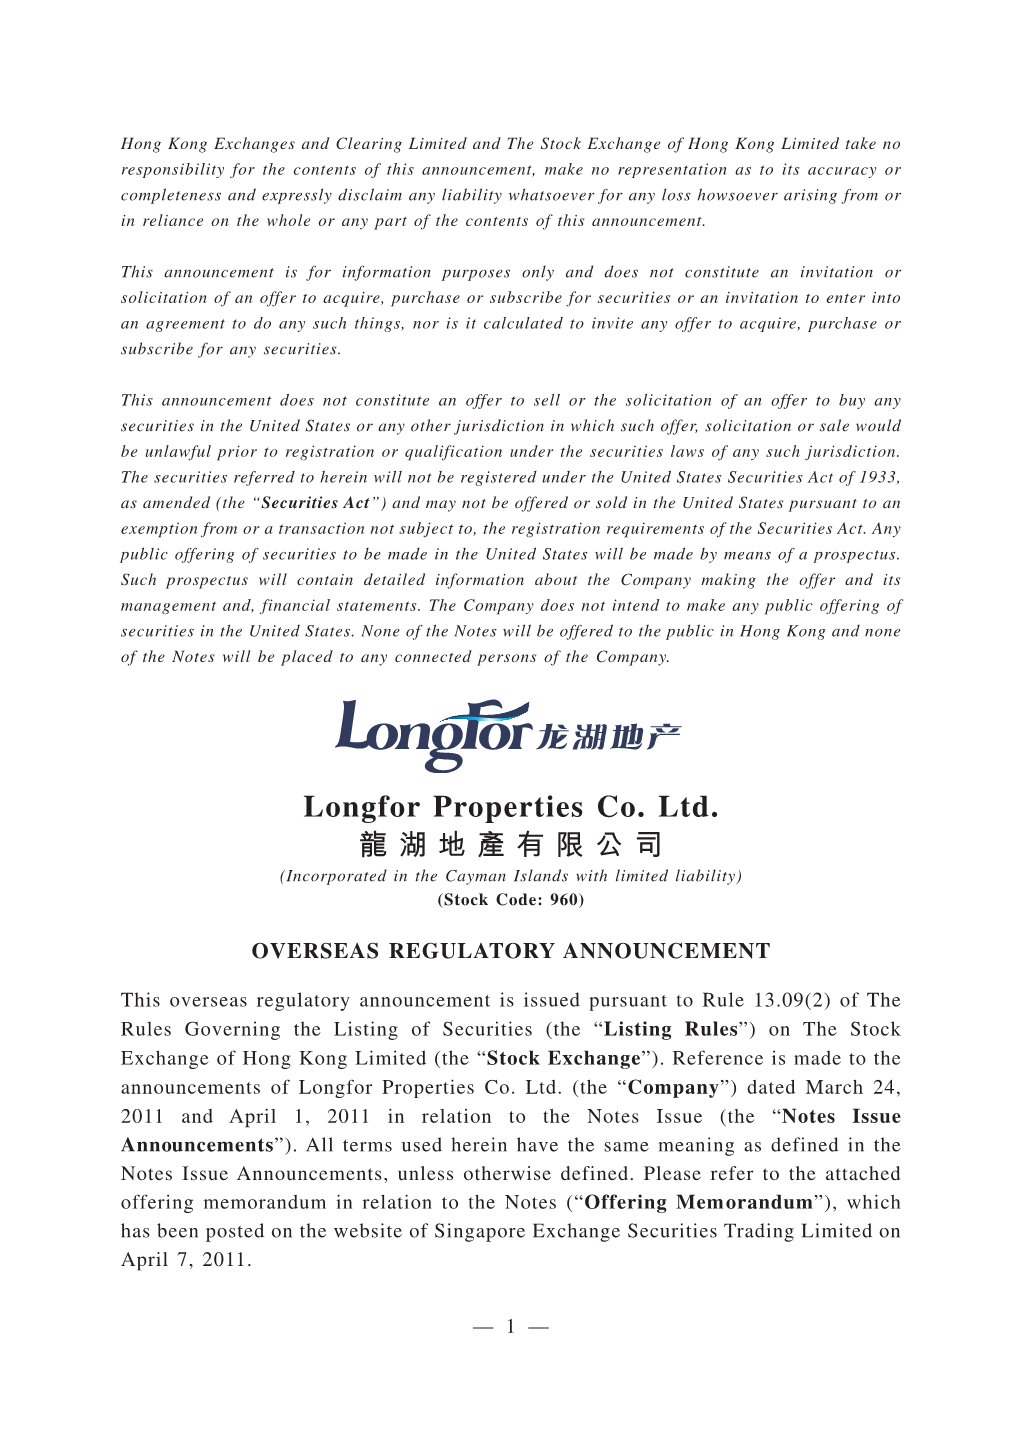 Longfor Properties Co. Ltd. 龍湖地產有限公司 (Incorporated in the Cayman Islands with Limited Liability) (Stock Code: 960)